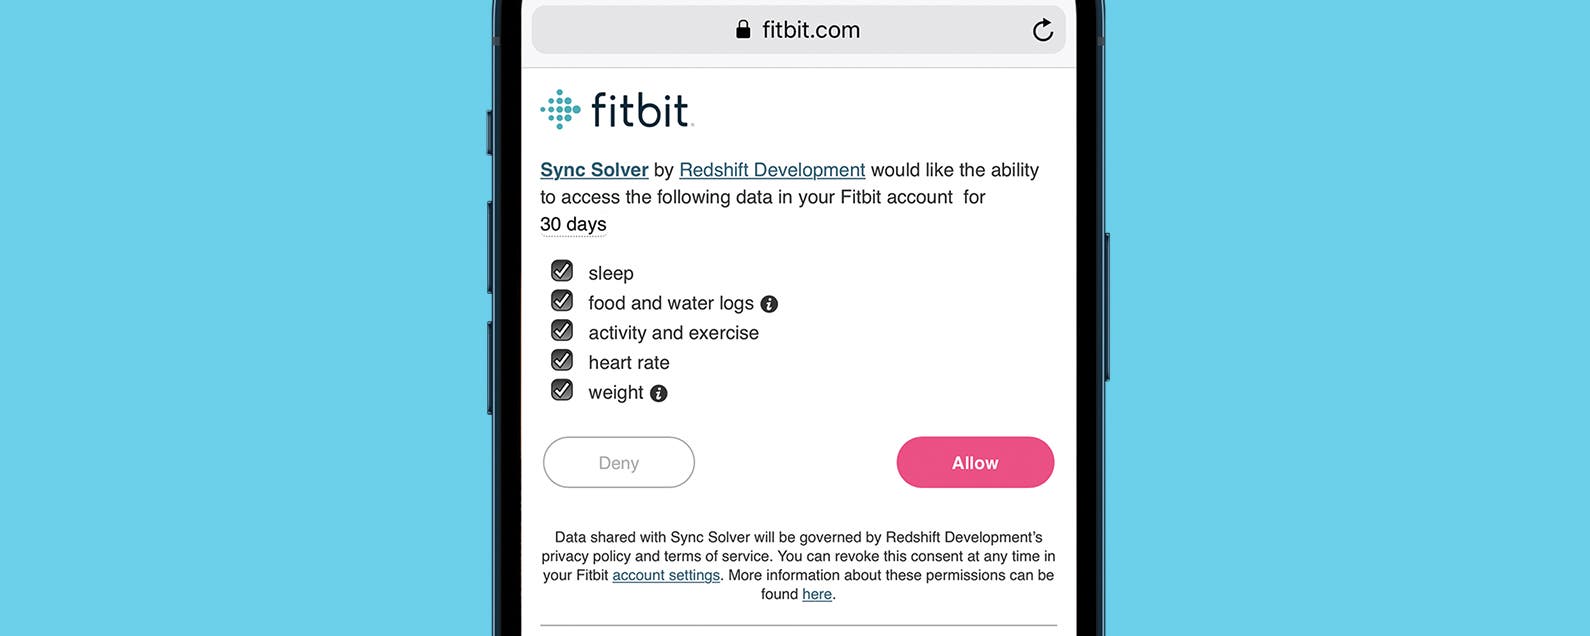 fitbit connect app not working on pc